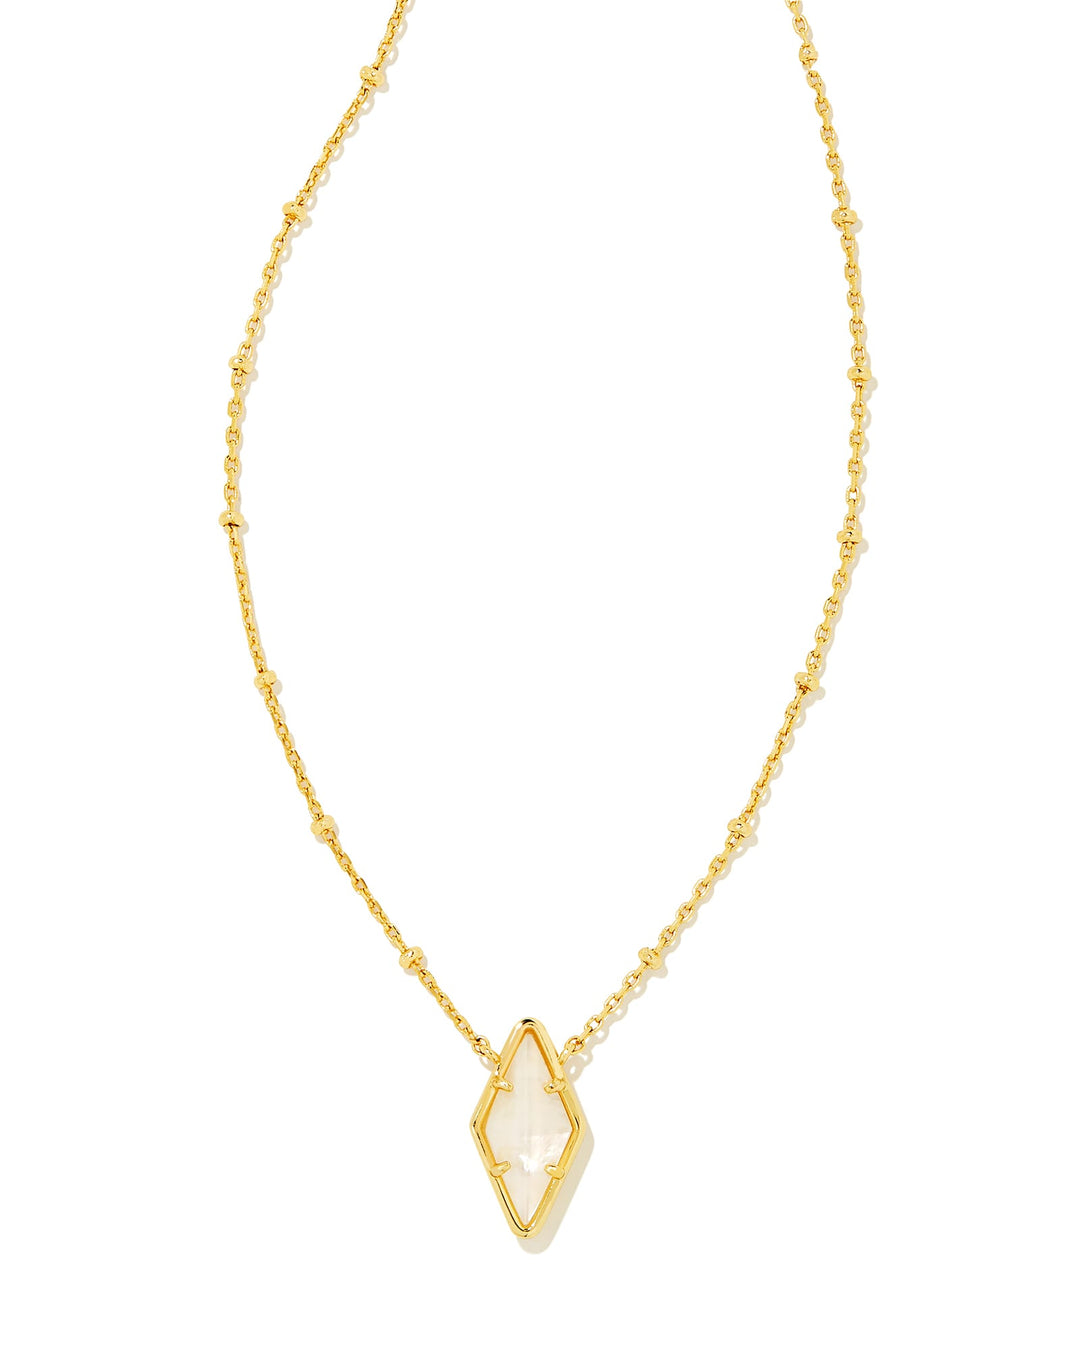 KINSLEY SHORT PENDANT NECKLACE - GOLD IVORY MOTHER OF PEARL